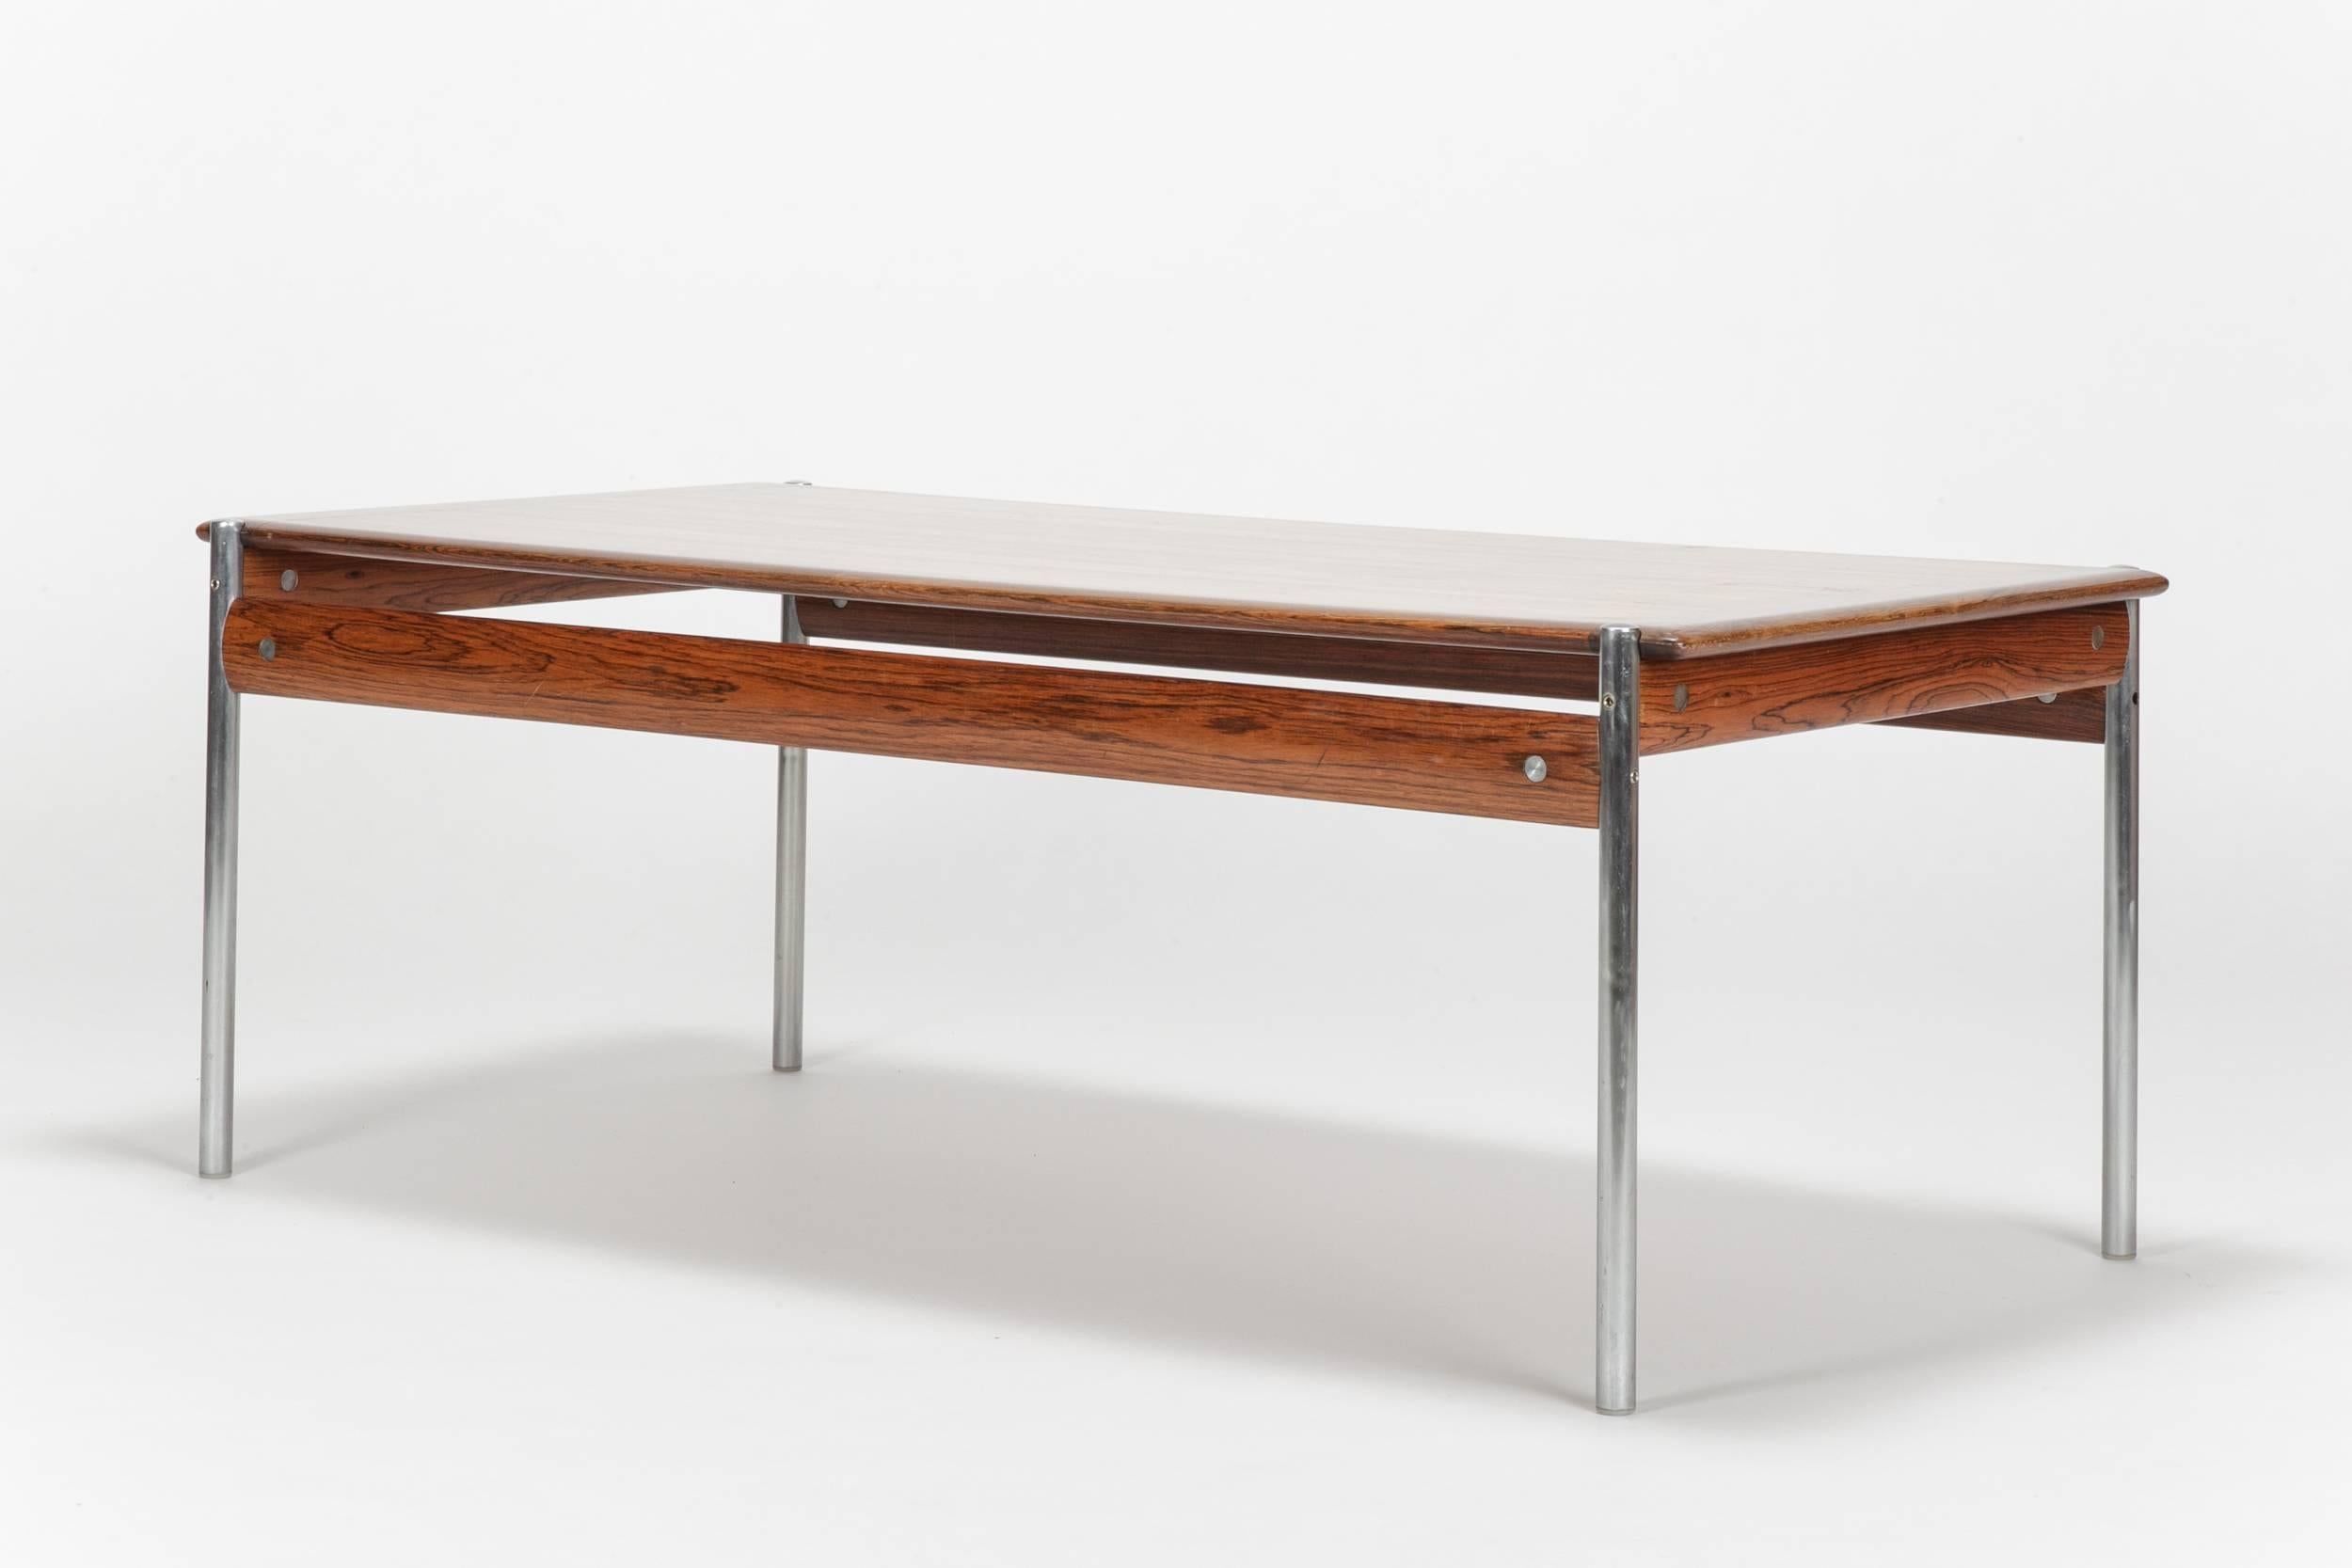 Stunning Sven Ivar Dysthe coffee table from the 1959 designed 